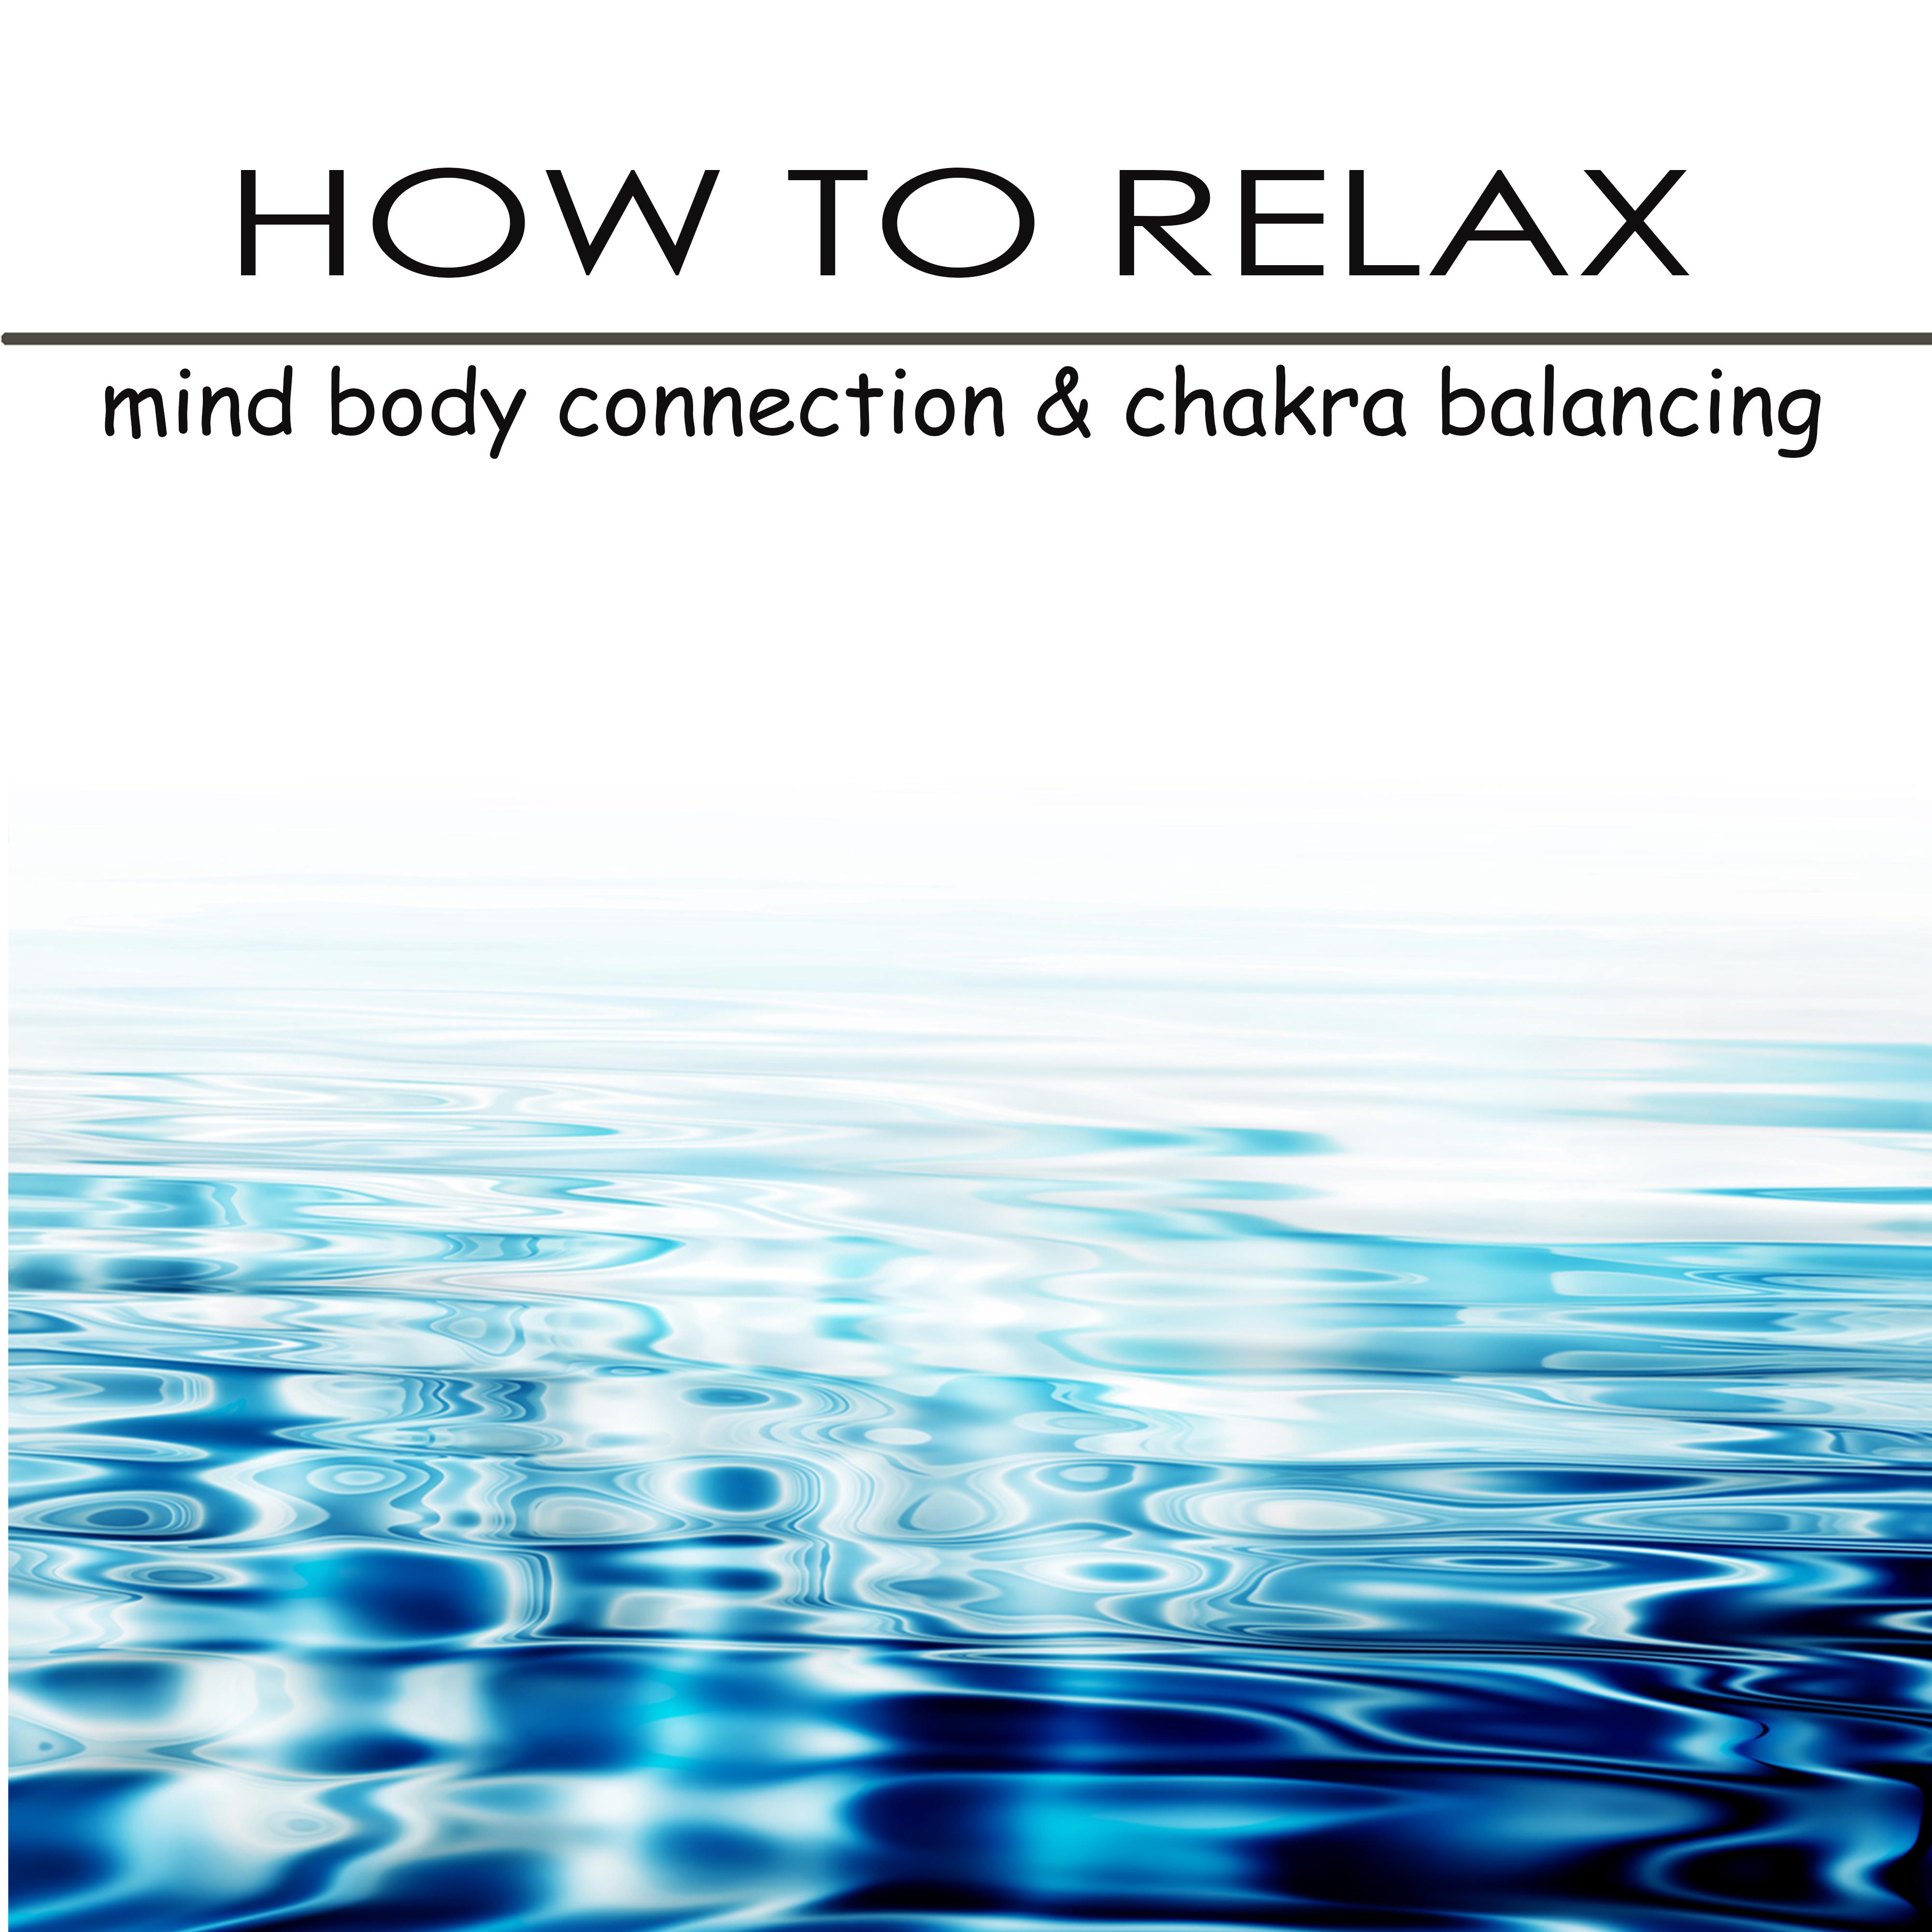 How to Relax - Mind Boby Connection & Chakra Balancing with Relaxing Music & Yoga Poses